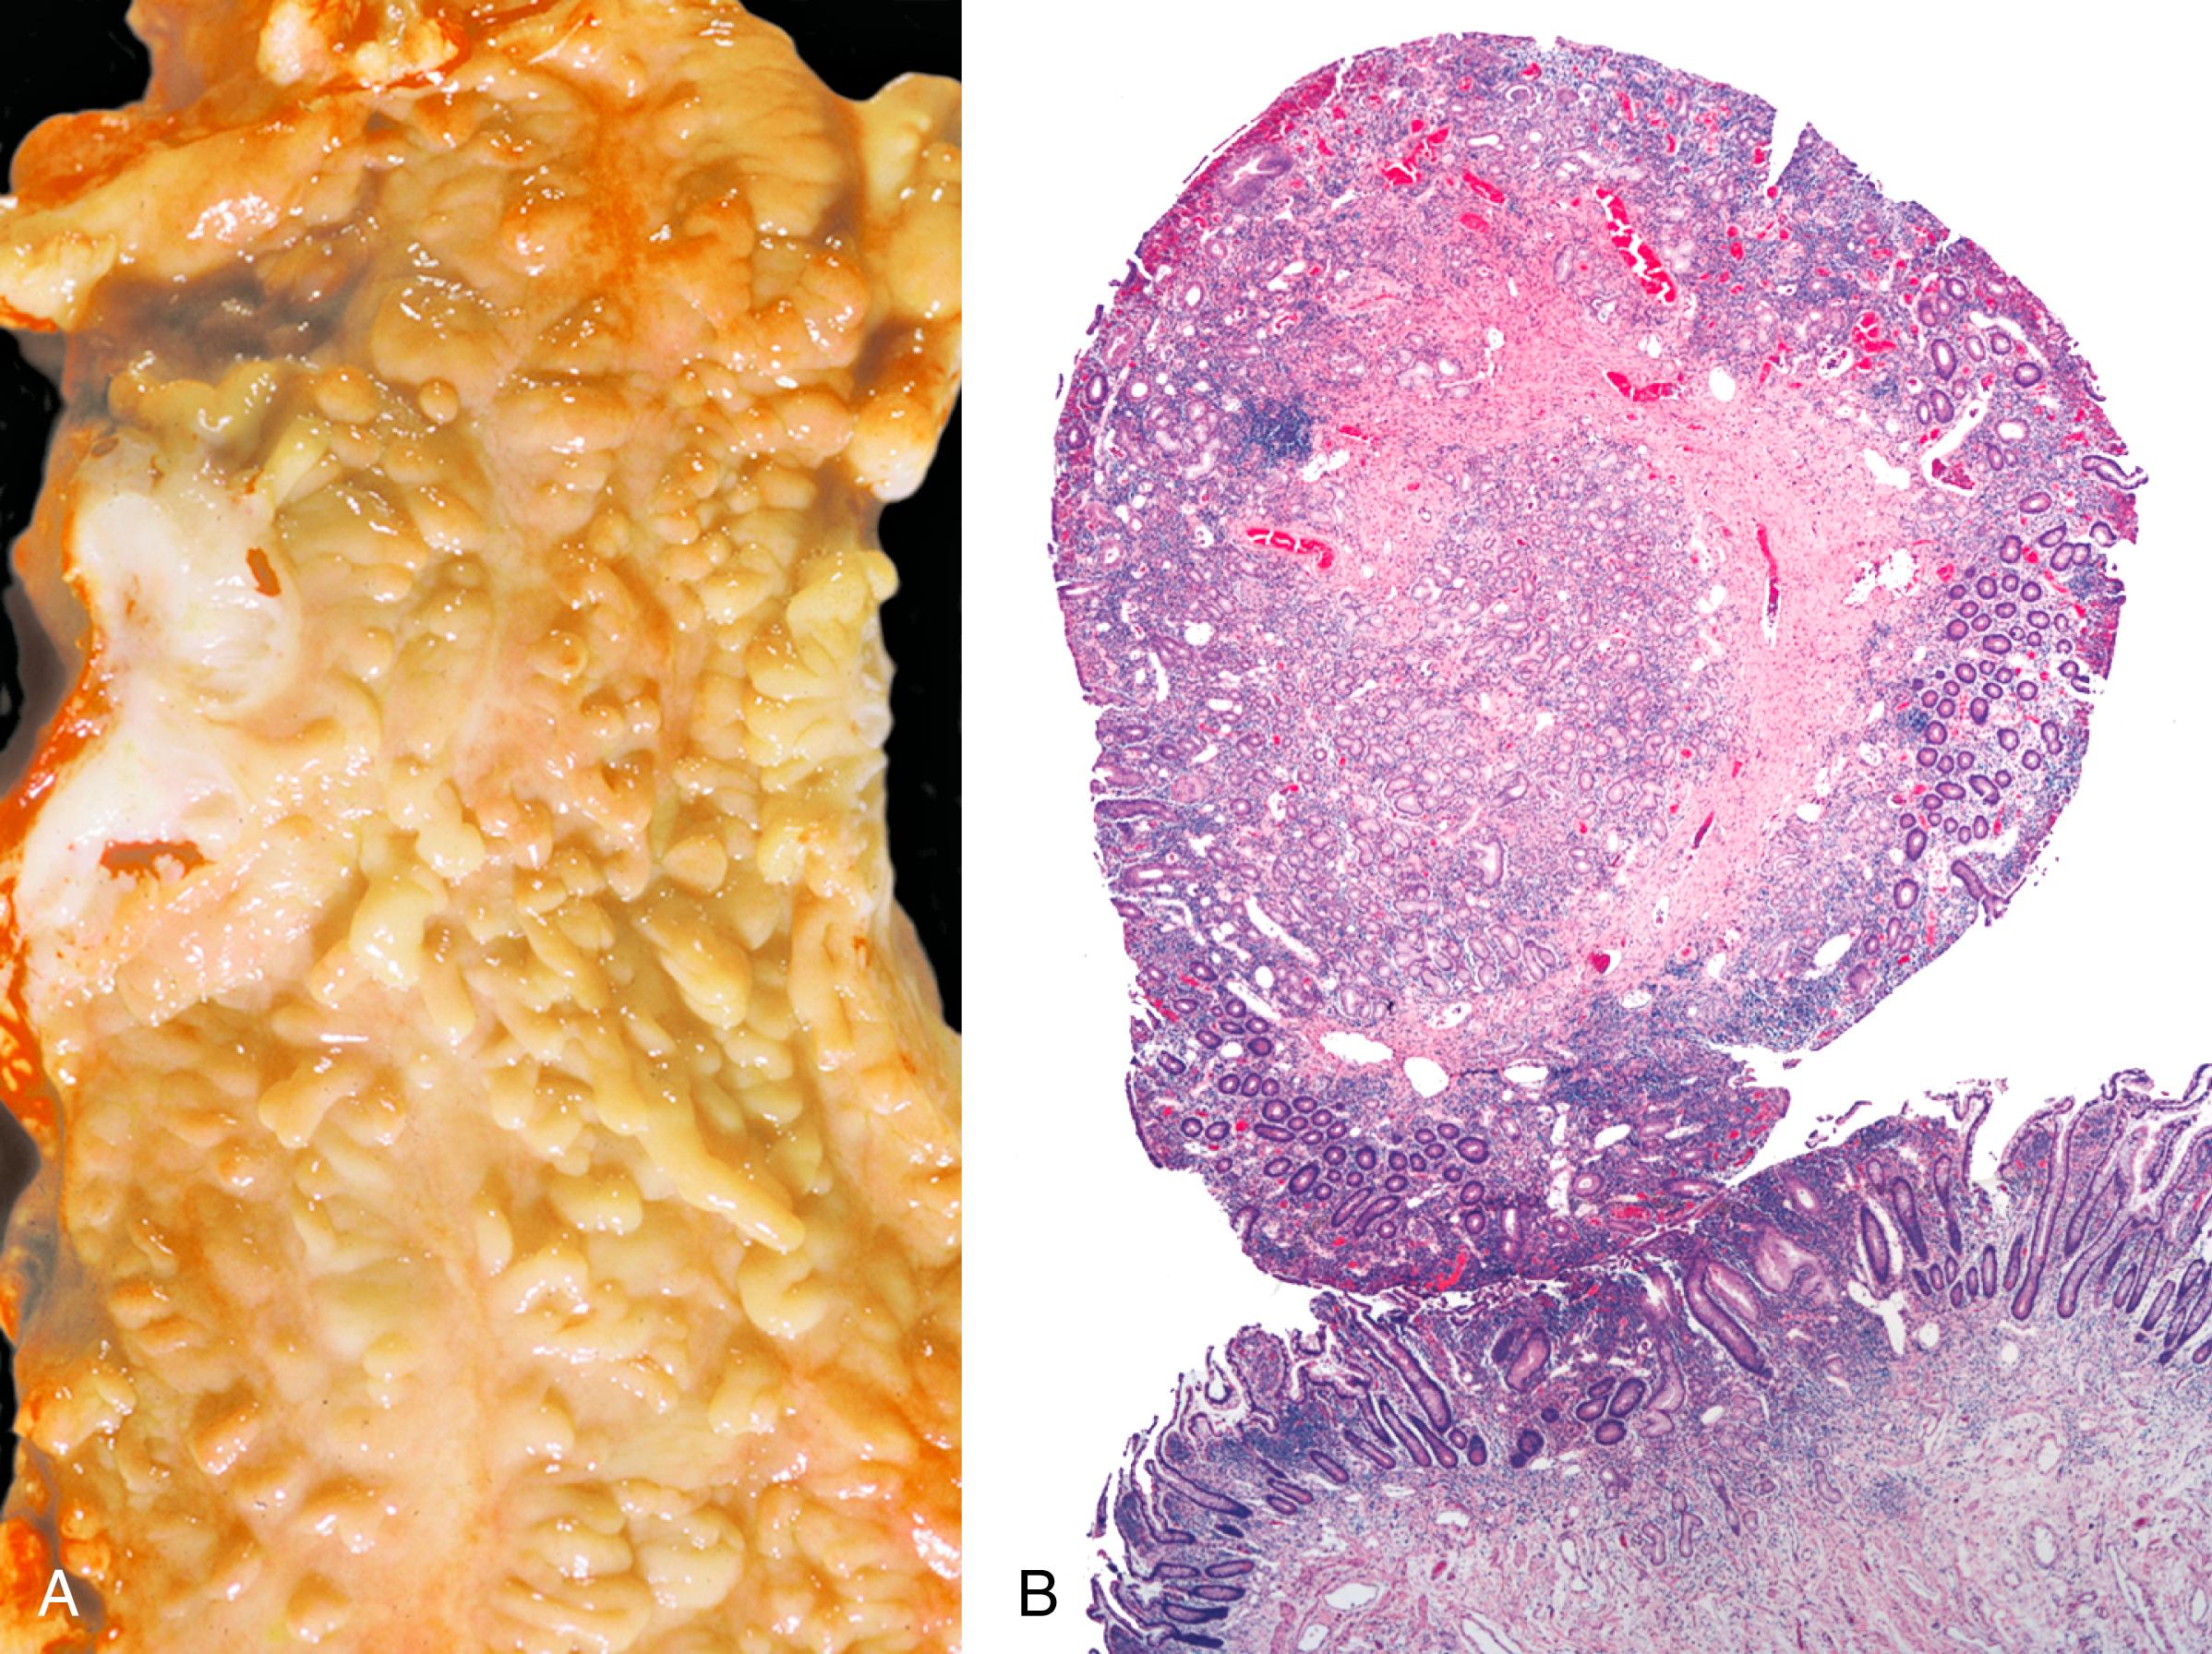 FIGURE 21.1, Crohn’s disease–associated “pseudopolyps” of the ileum. A, Much of the ileal mucosa is flattened and atrophic, and residual plaquelike and polypoid areas of mucosa are present. B, A polypoid excrescence of mucosa is preserved in an area of the ileum affected by active ileitis.